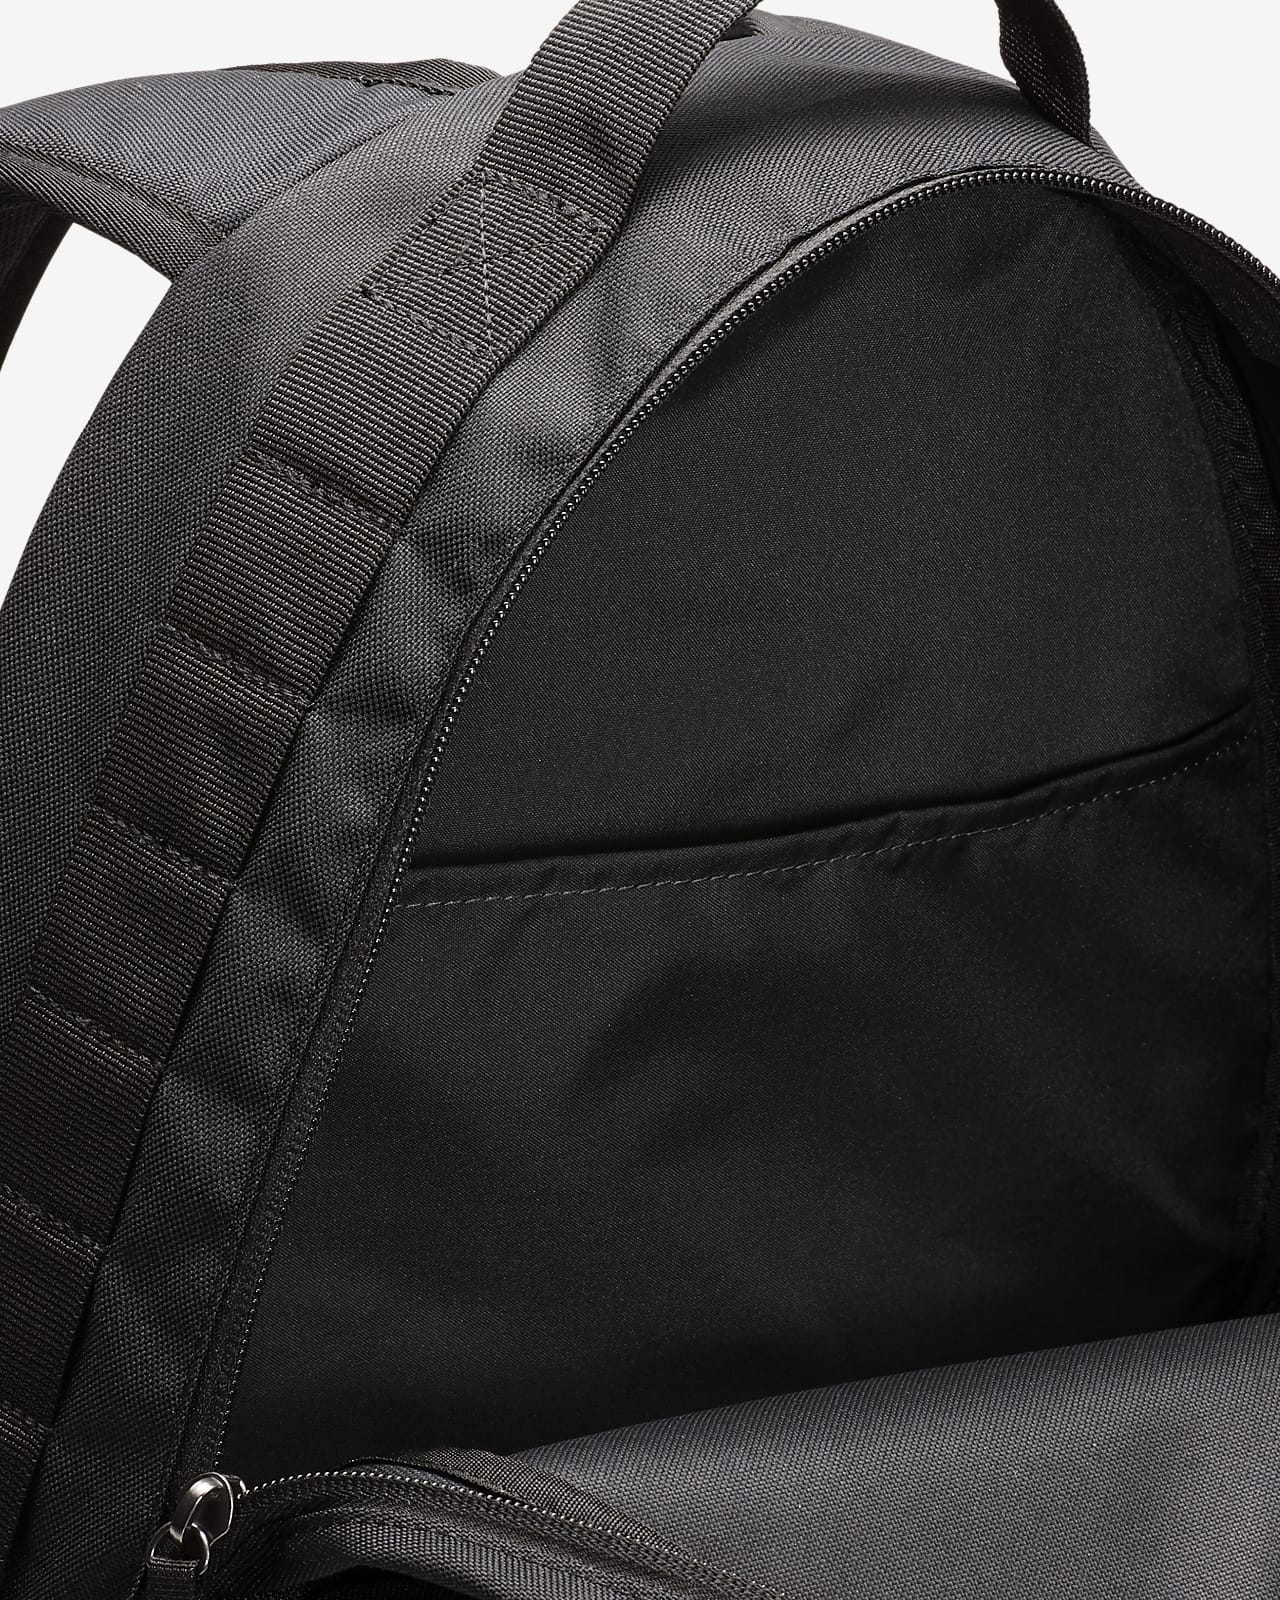 nike sb icon backpack review